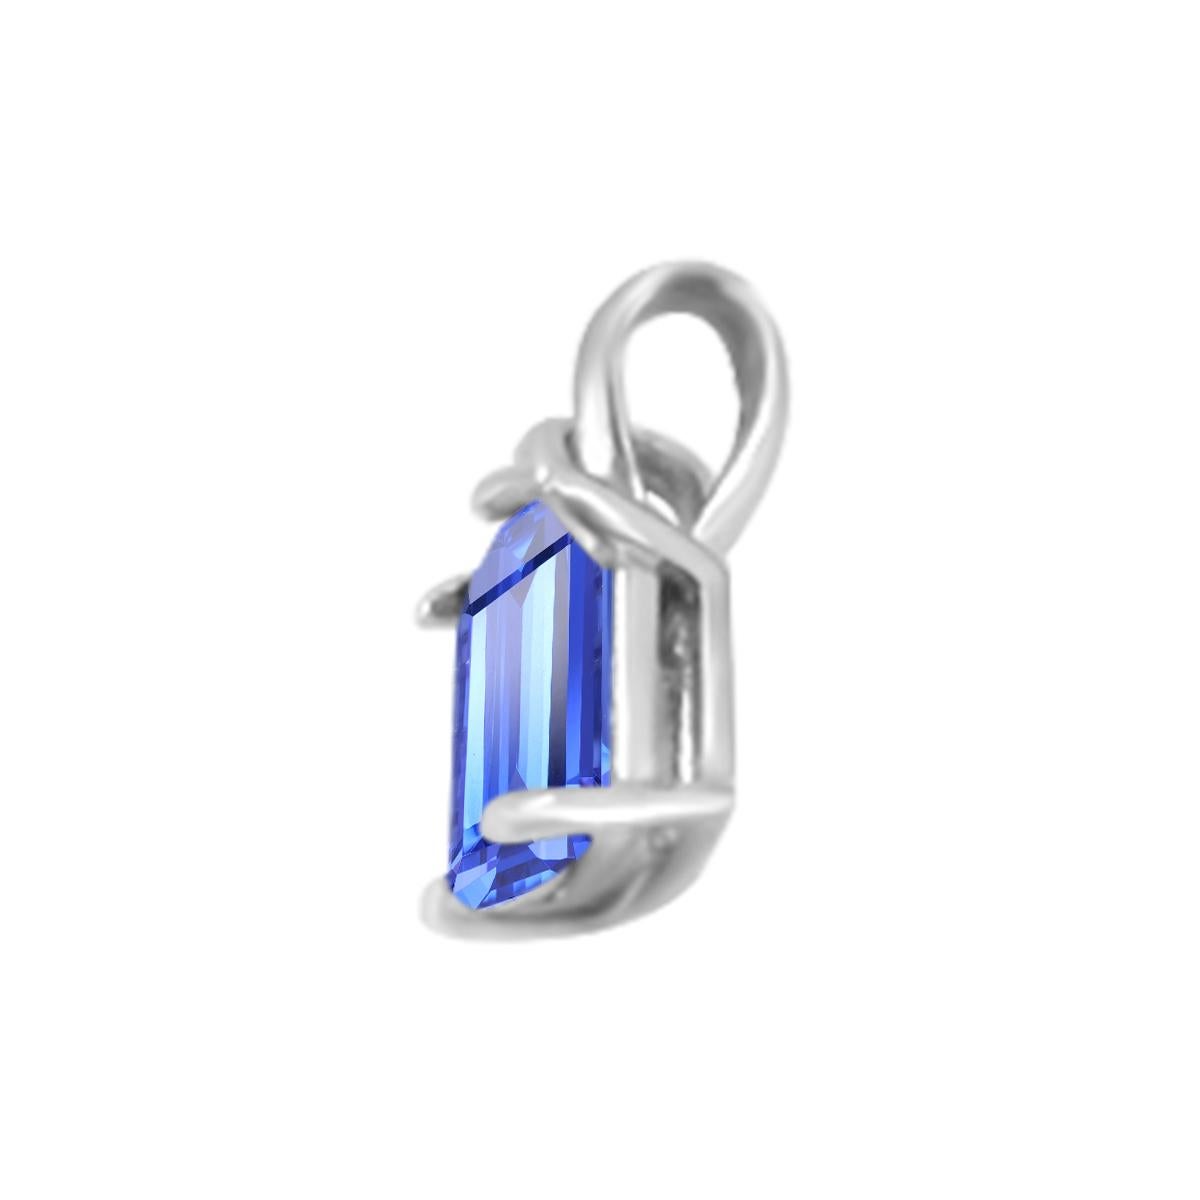 Elegant And Classy Tanzanite Pendant With A Very Pretty Bright Blue Color 5x3mm Tanzanite Gemstone.
The Emerald Cut Looks Very Simple Yet Beautiful , The Gemstone Is Set In 14k White Gold .
A Great Piece To Wear And Layer With Other.


Style#